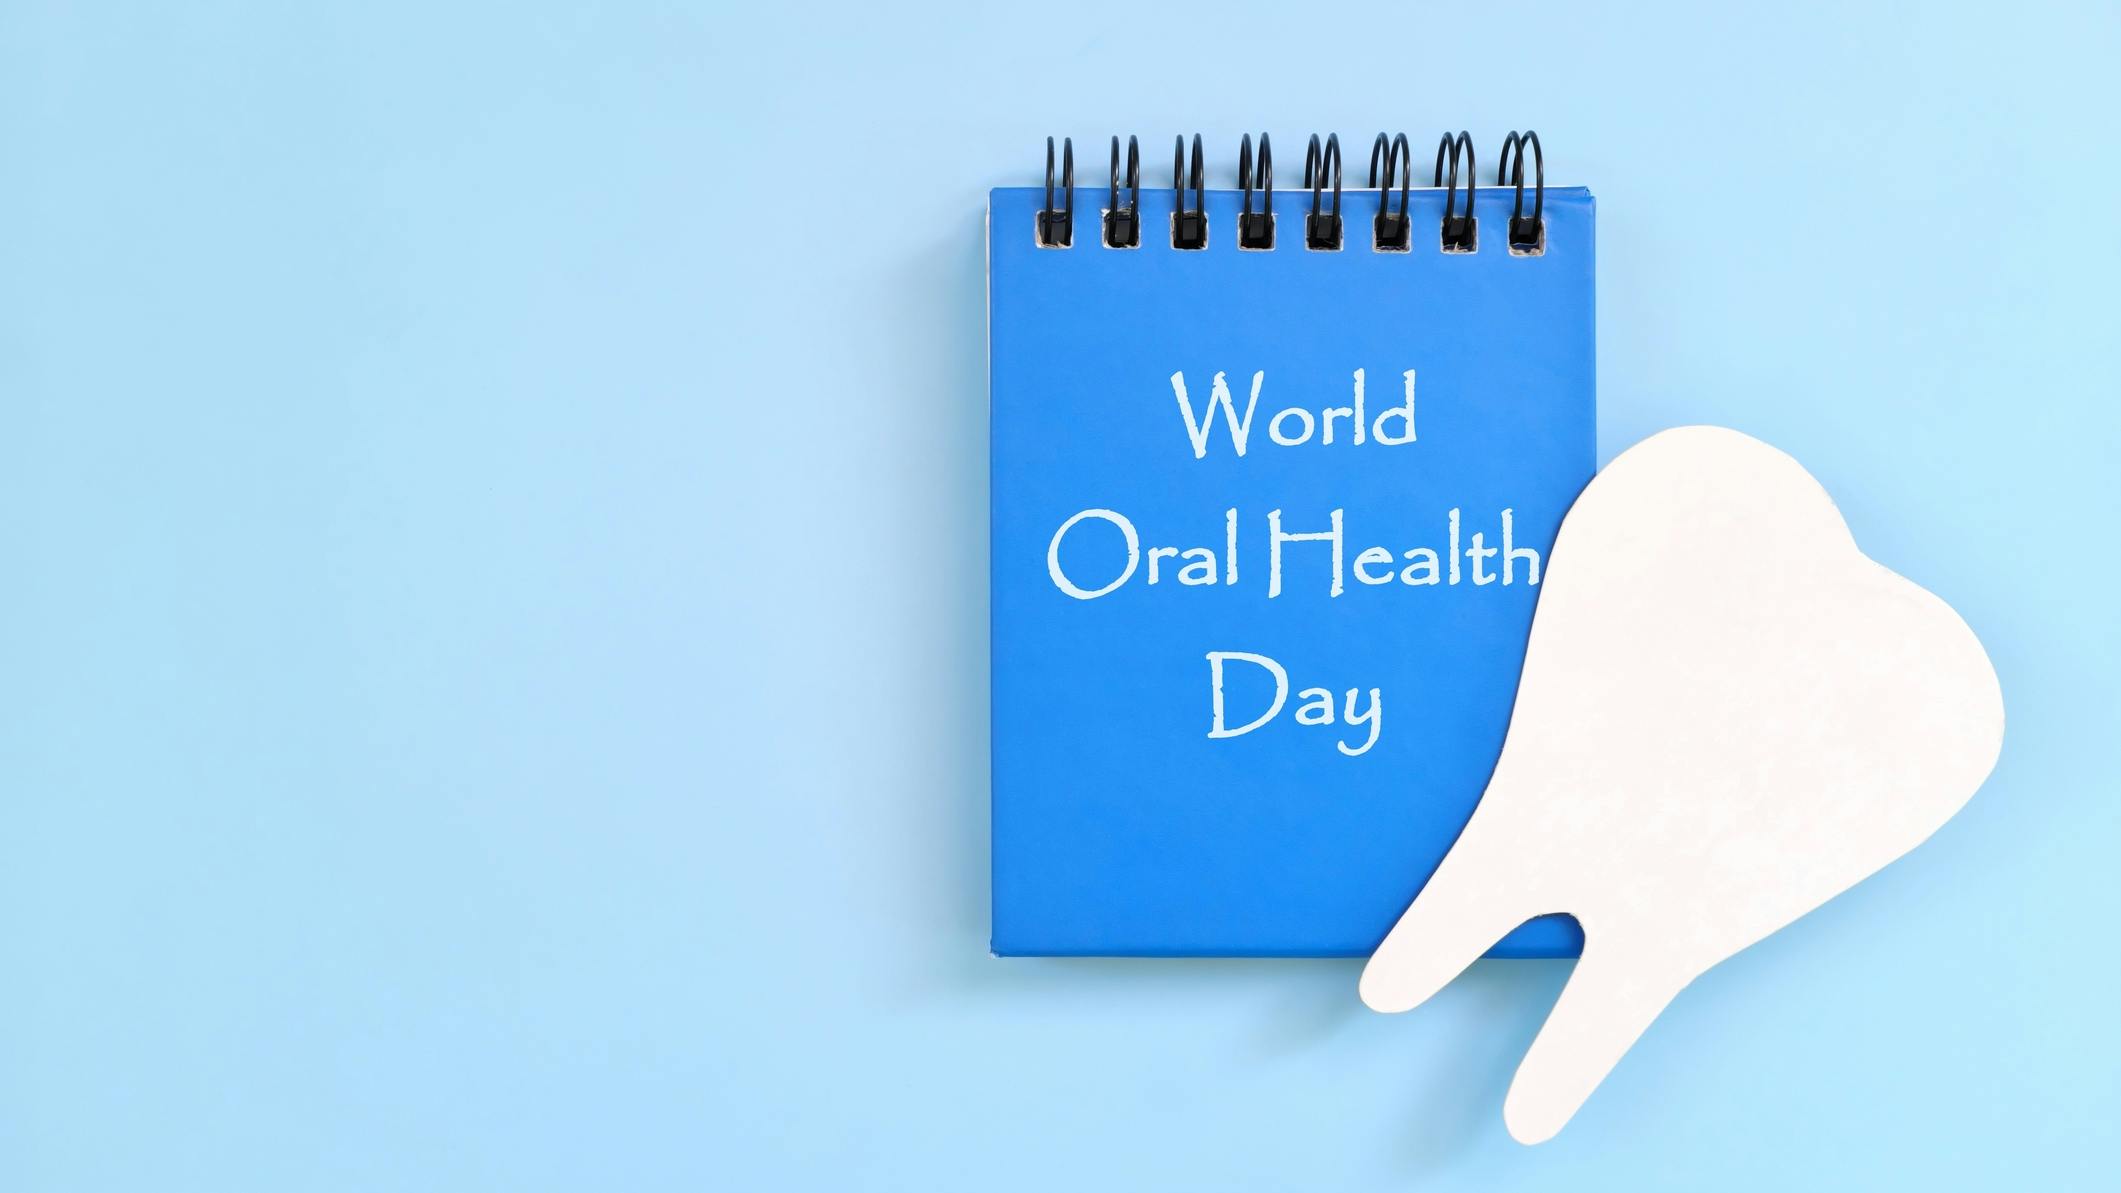 Enhancing patient awareness of the connection between oral health and overall health through chairside education